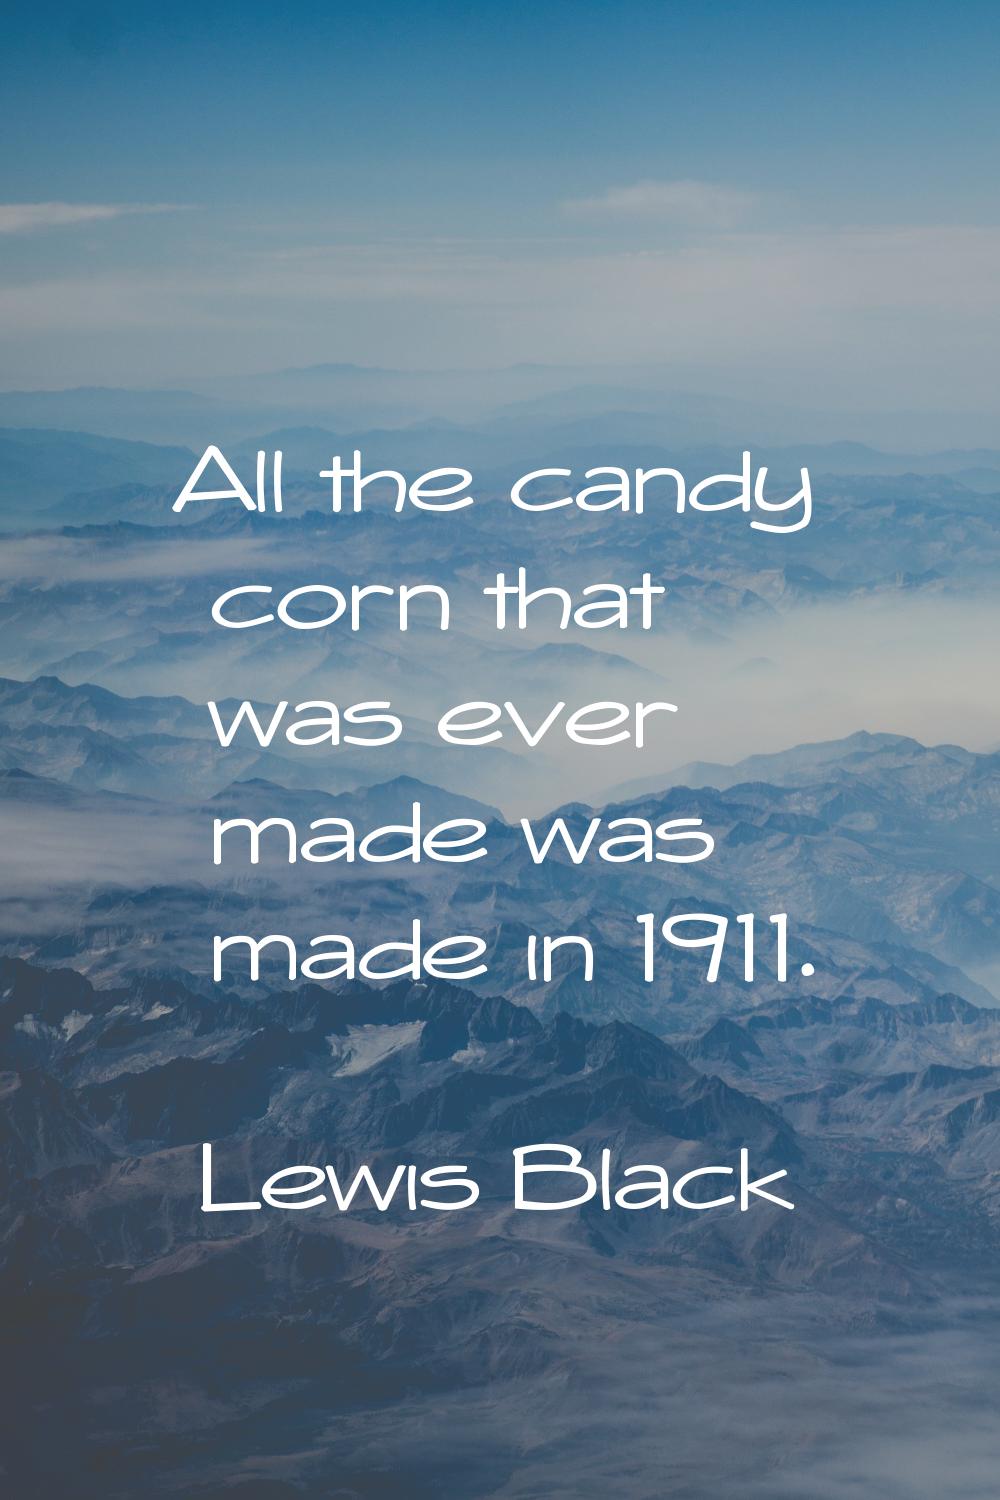 All the candy corn that was ever made was made in 1911.